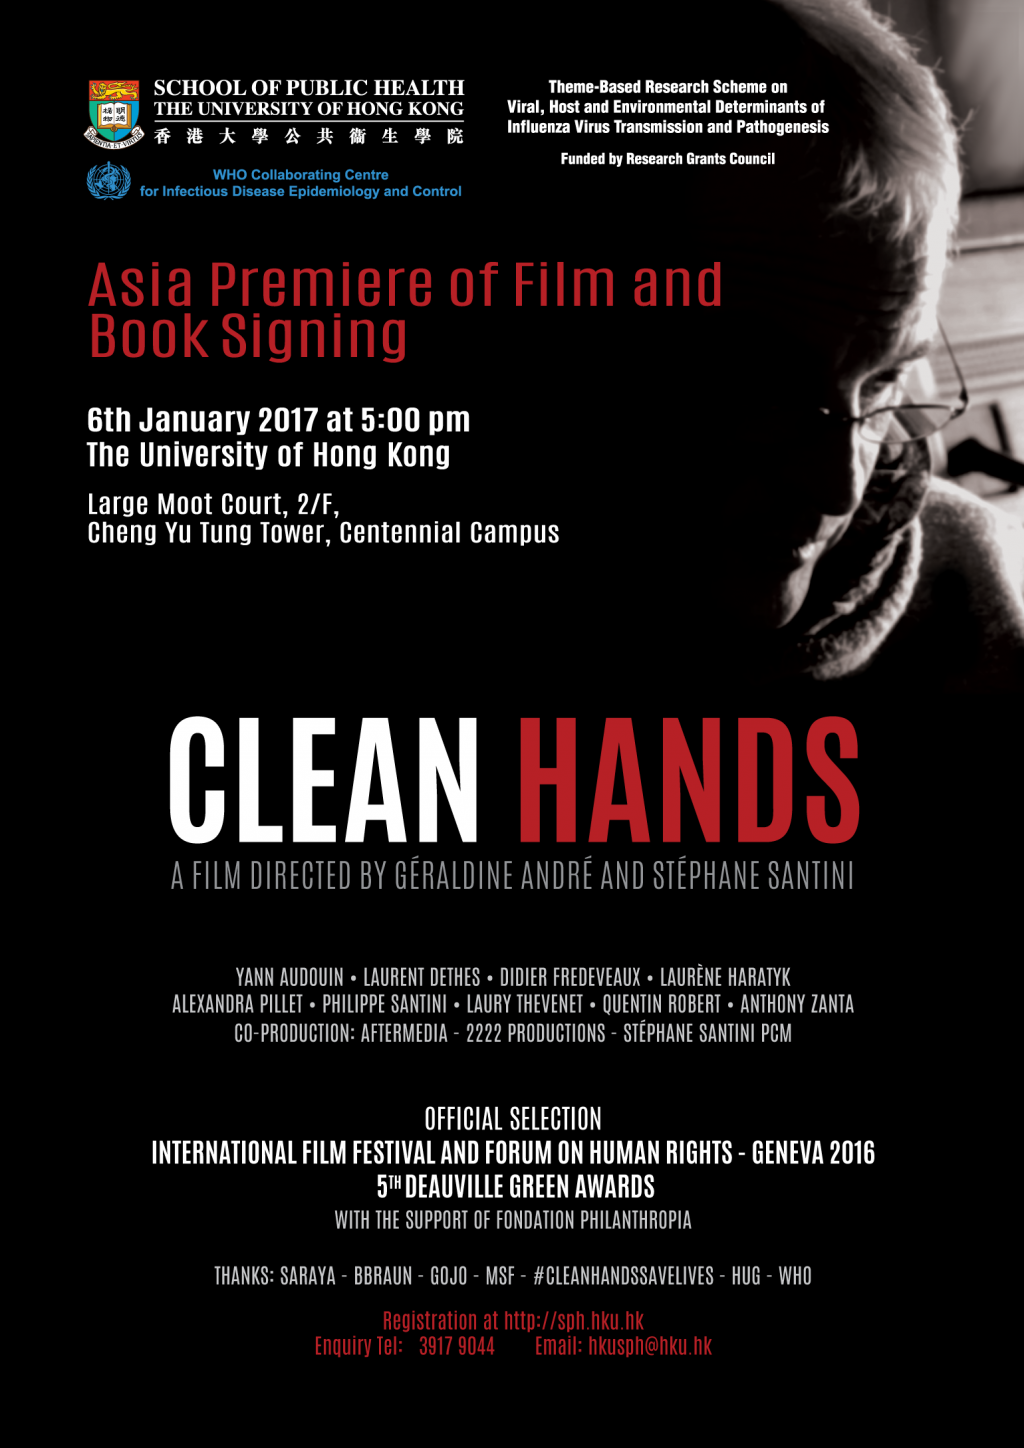 Asia Premiere of Film and Book Signing on Clean Hands Save Lives on 6 January 2017